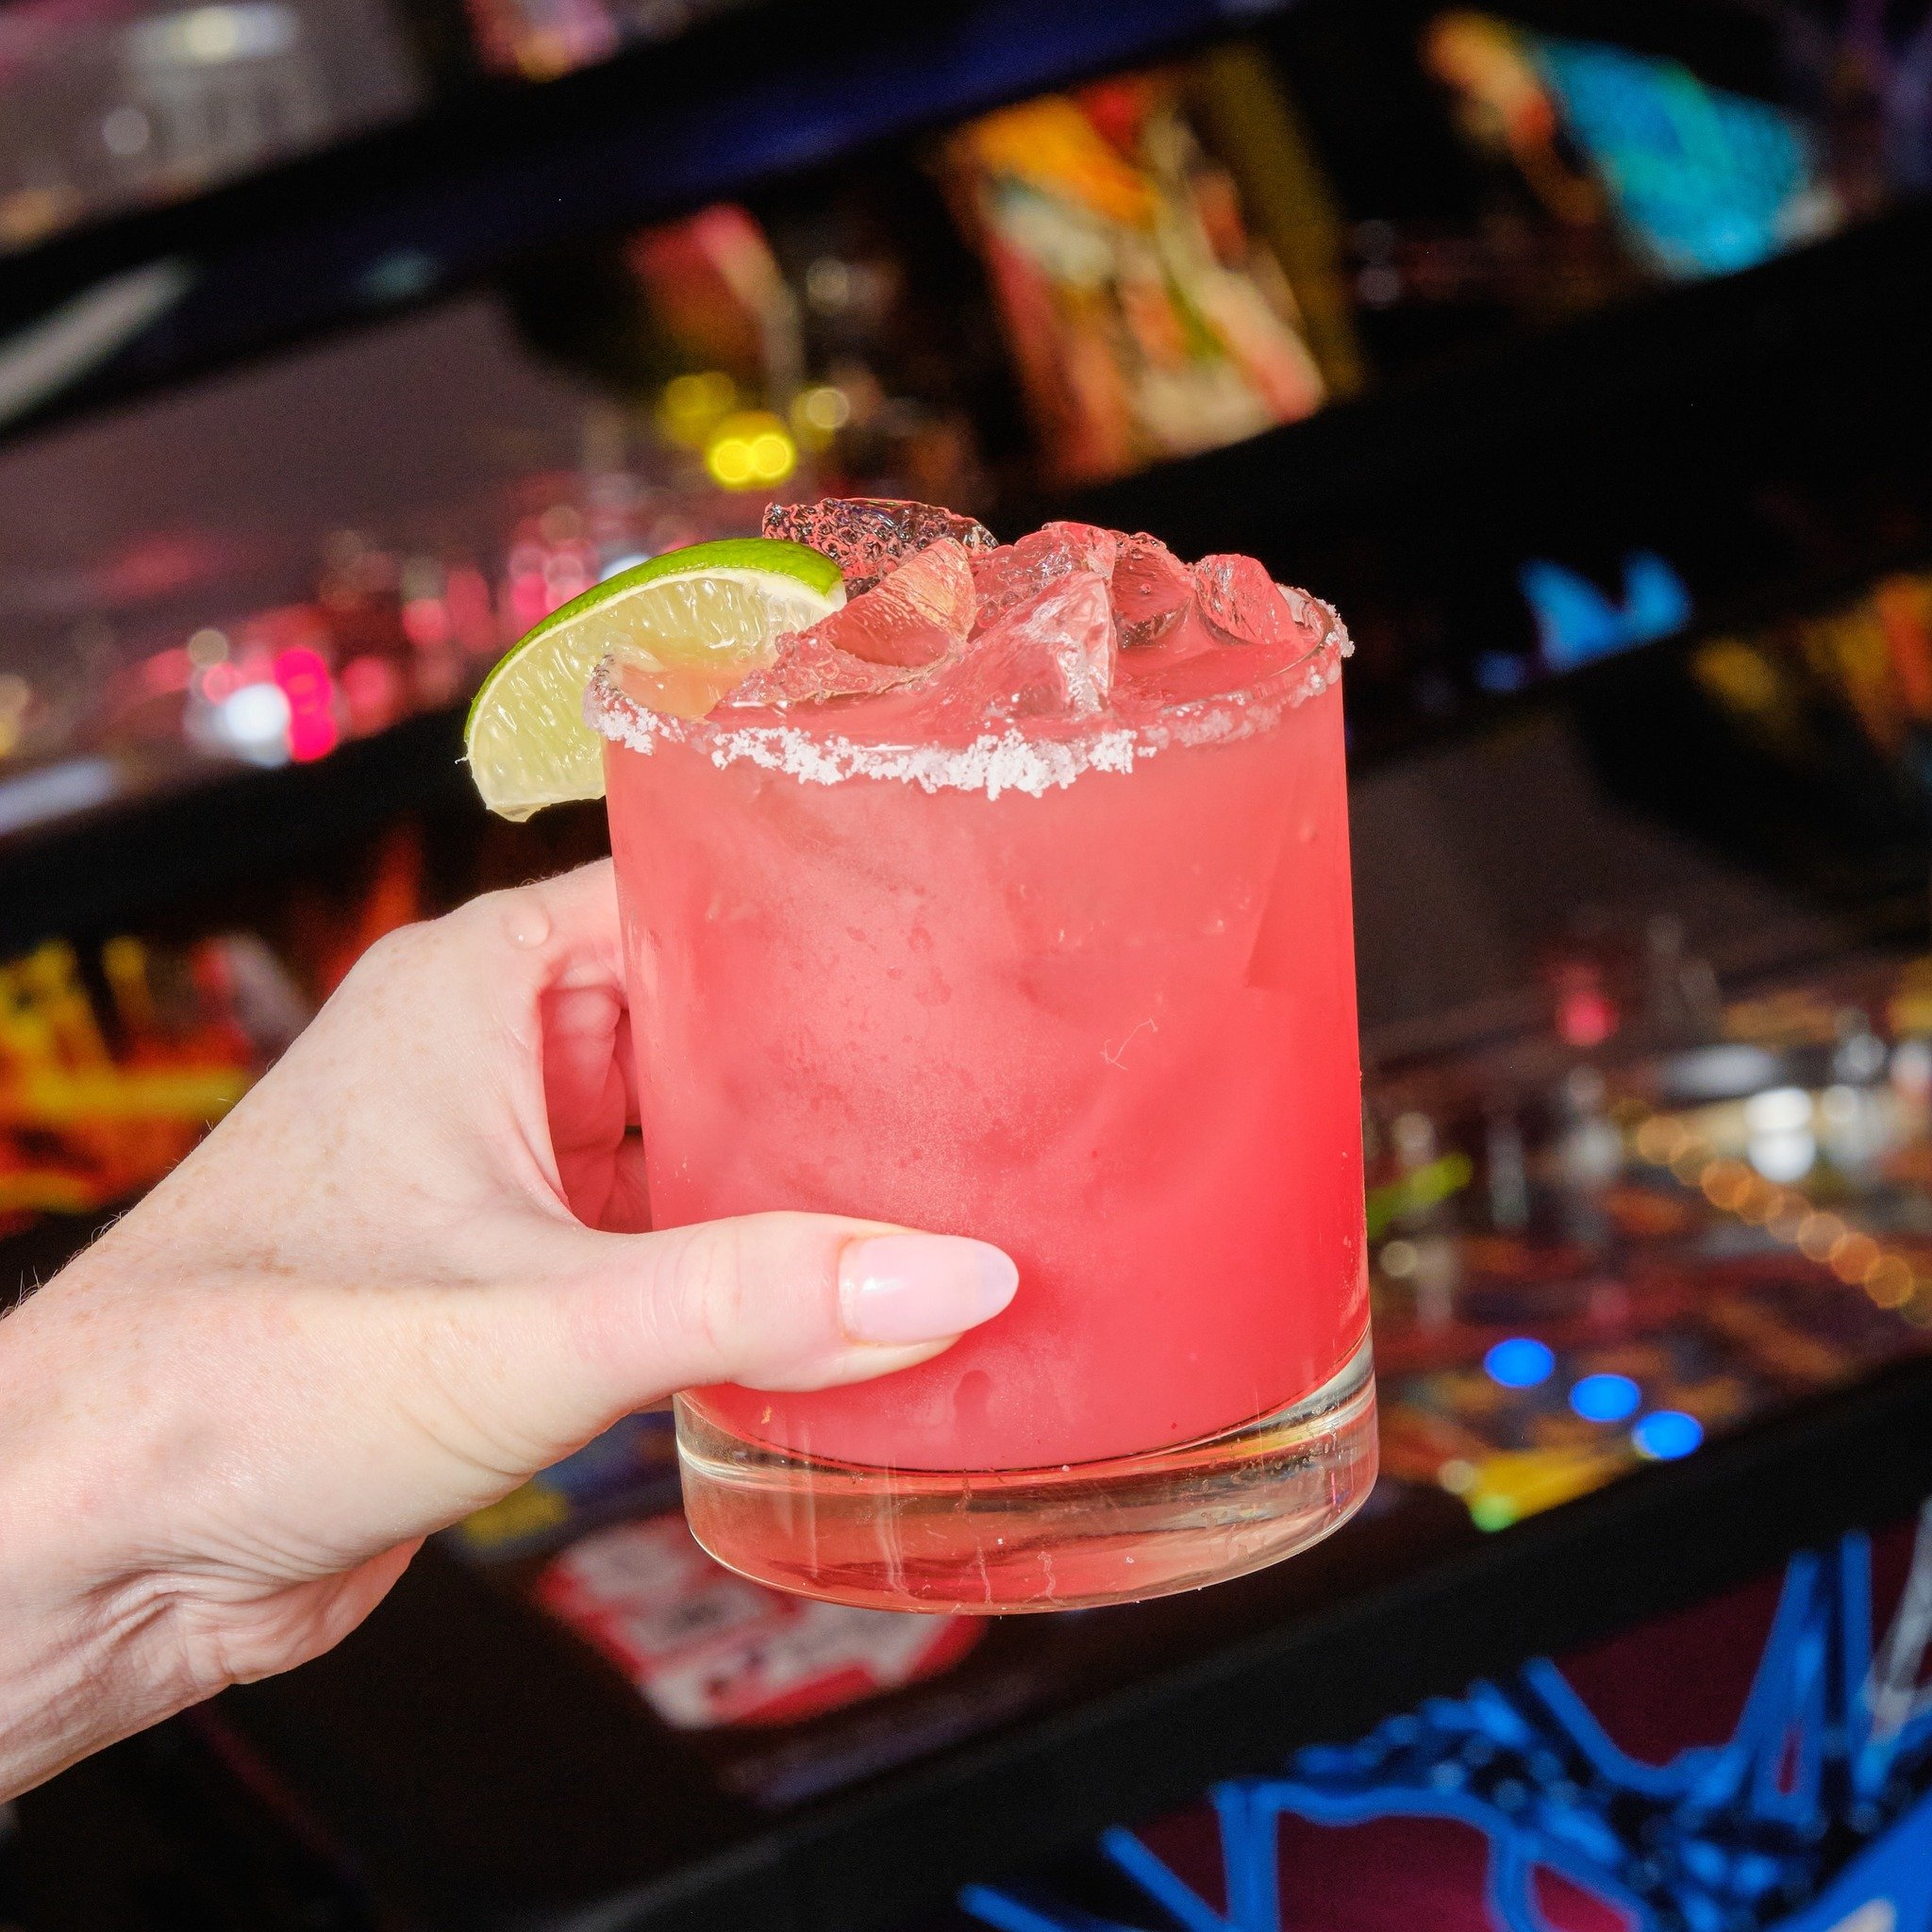 Let&rsquo;s have some fun this weekend! Did you know you can enjoy refreshing margaritas and cocktails while you get your Game On at Tin Pin Game Bar? We can&rsquo;t guarantee a high score after a marg or two, but we can guarantee FUN! Come on in!